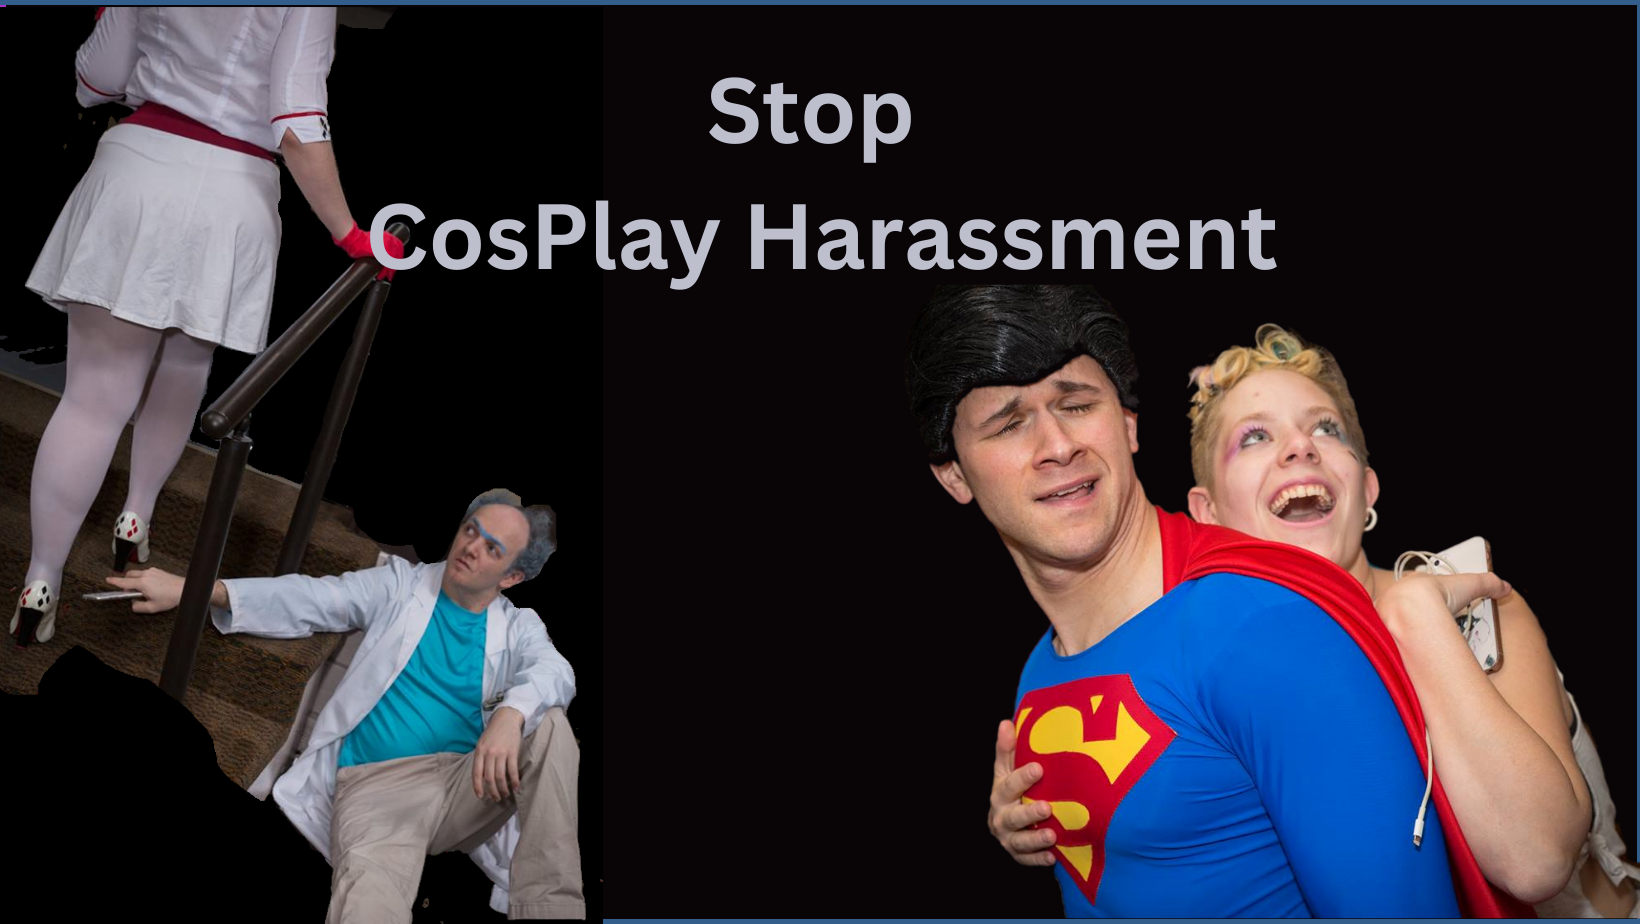 Stop Cosplay Harassment